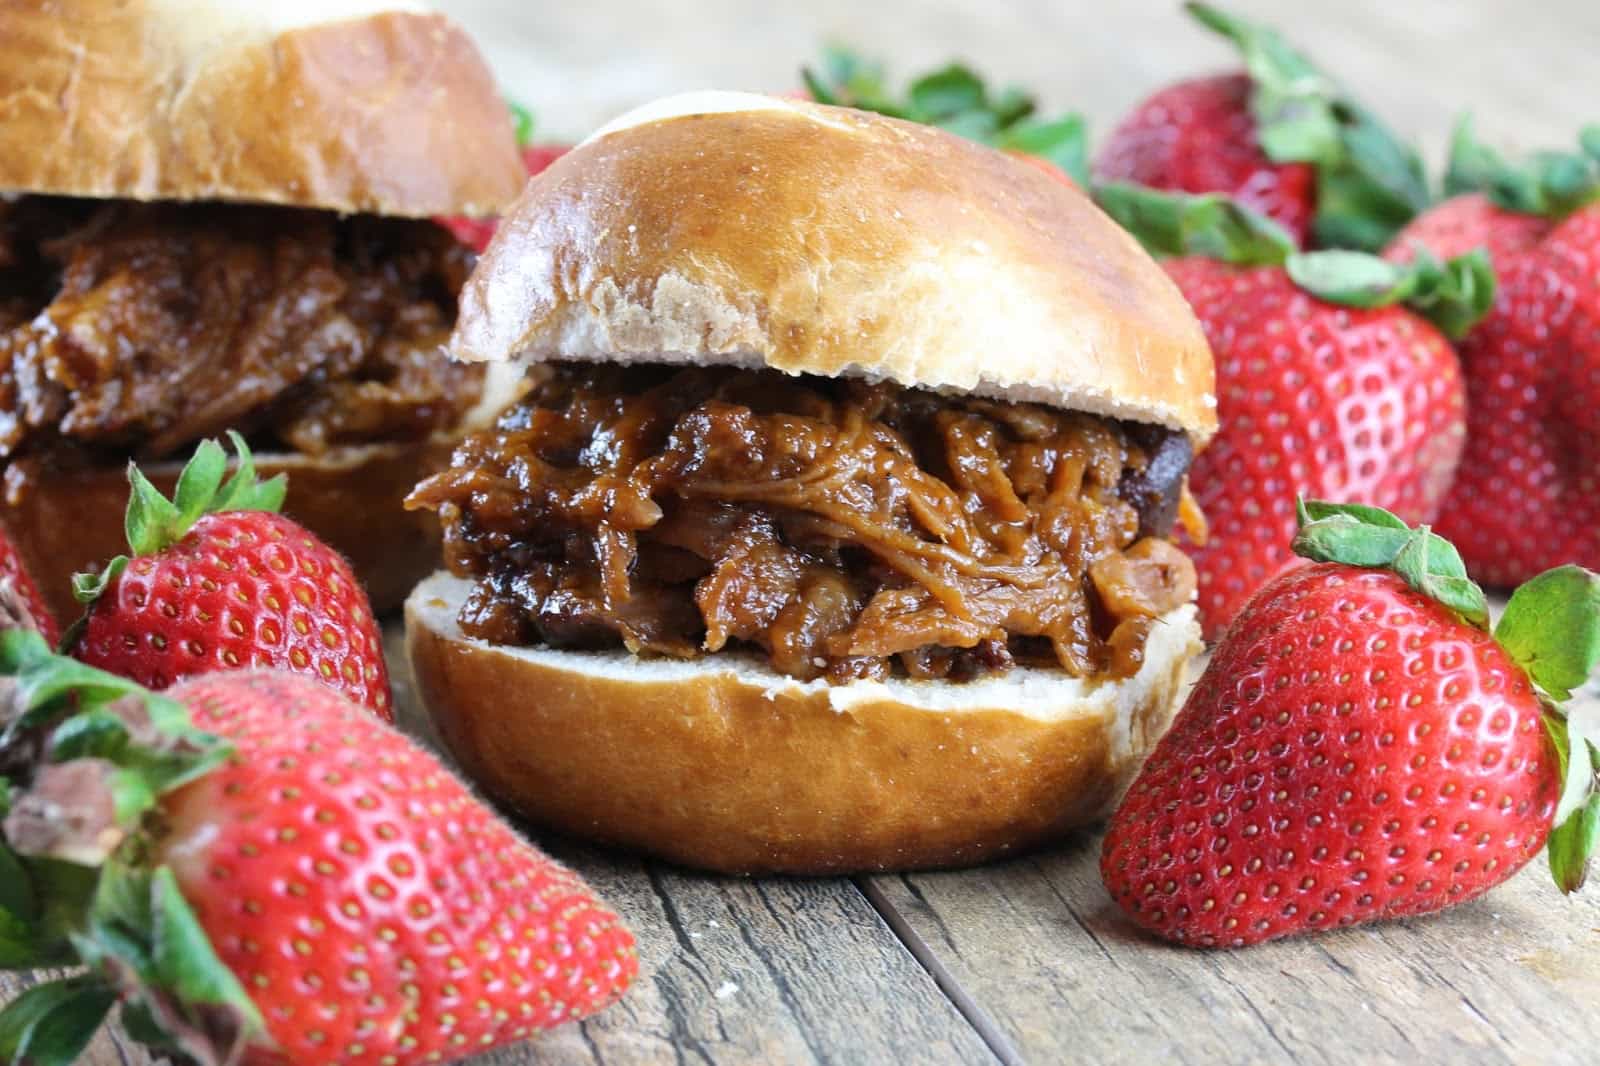 Slow Cooker Strawberry Chipotle Pulled Pork on a bun, surrounded by strawberries